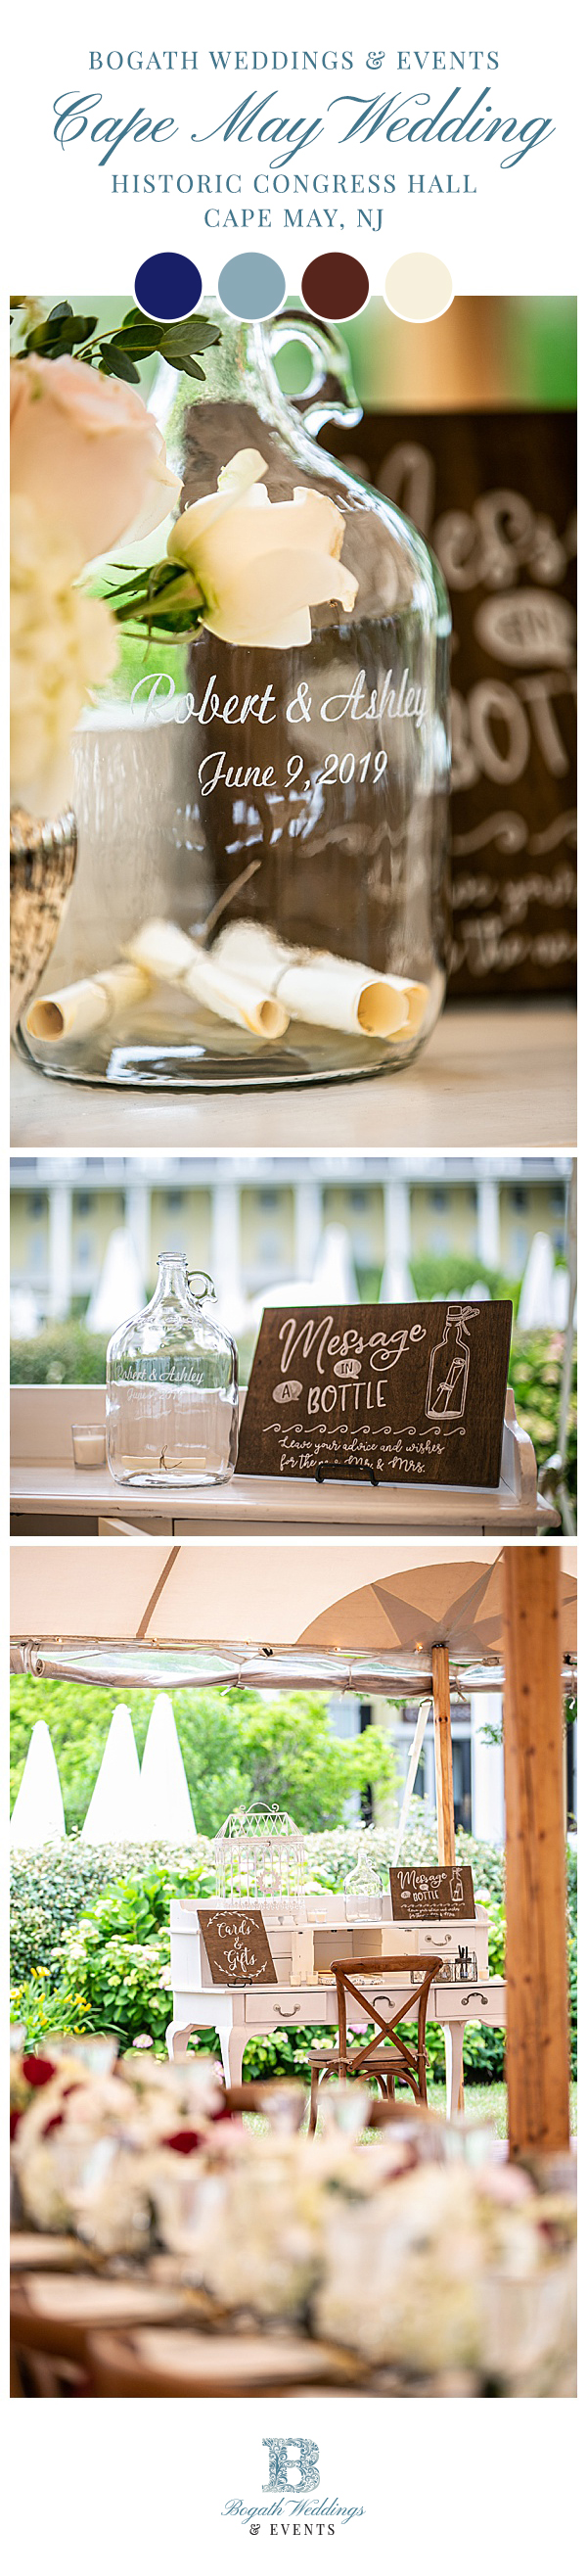 Cape-May-Wedding-Guest-Book-Message-in-a-bottle